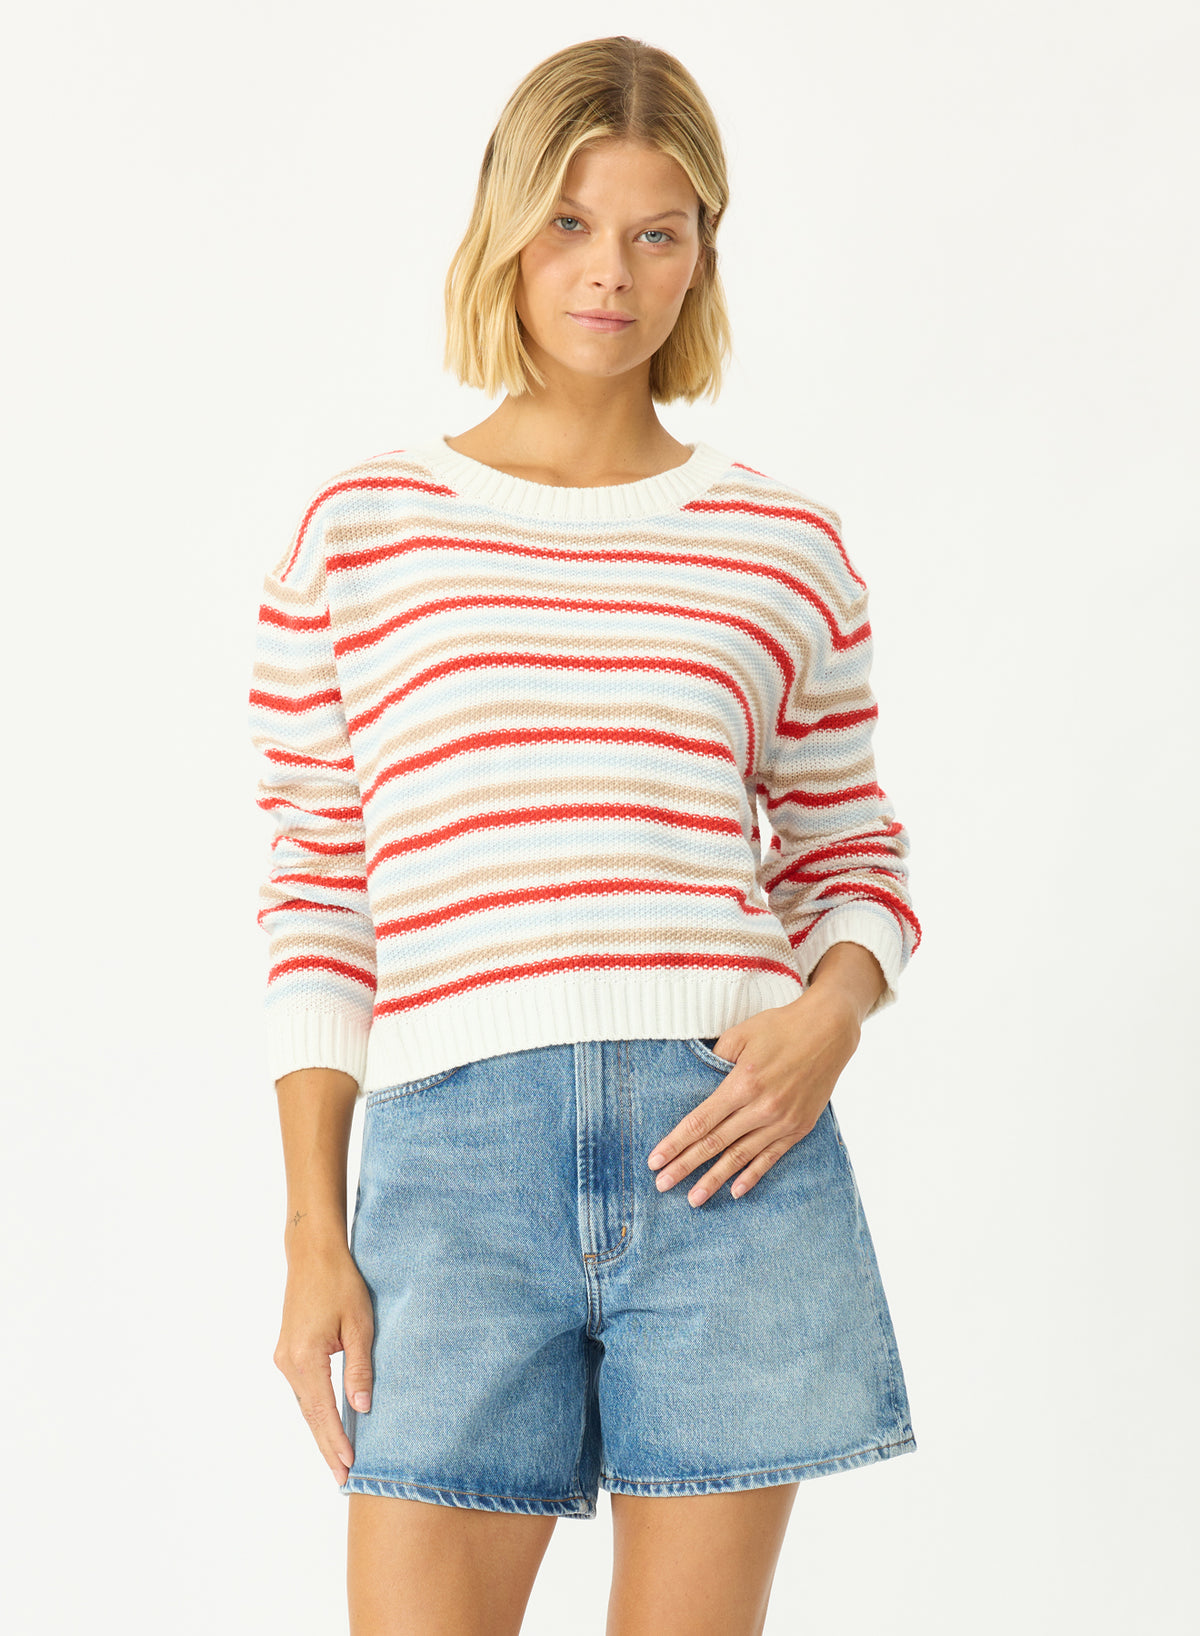 Stitches + Stripes Cass Pullover